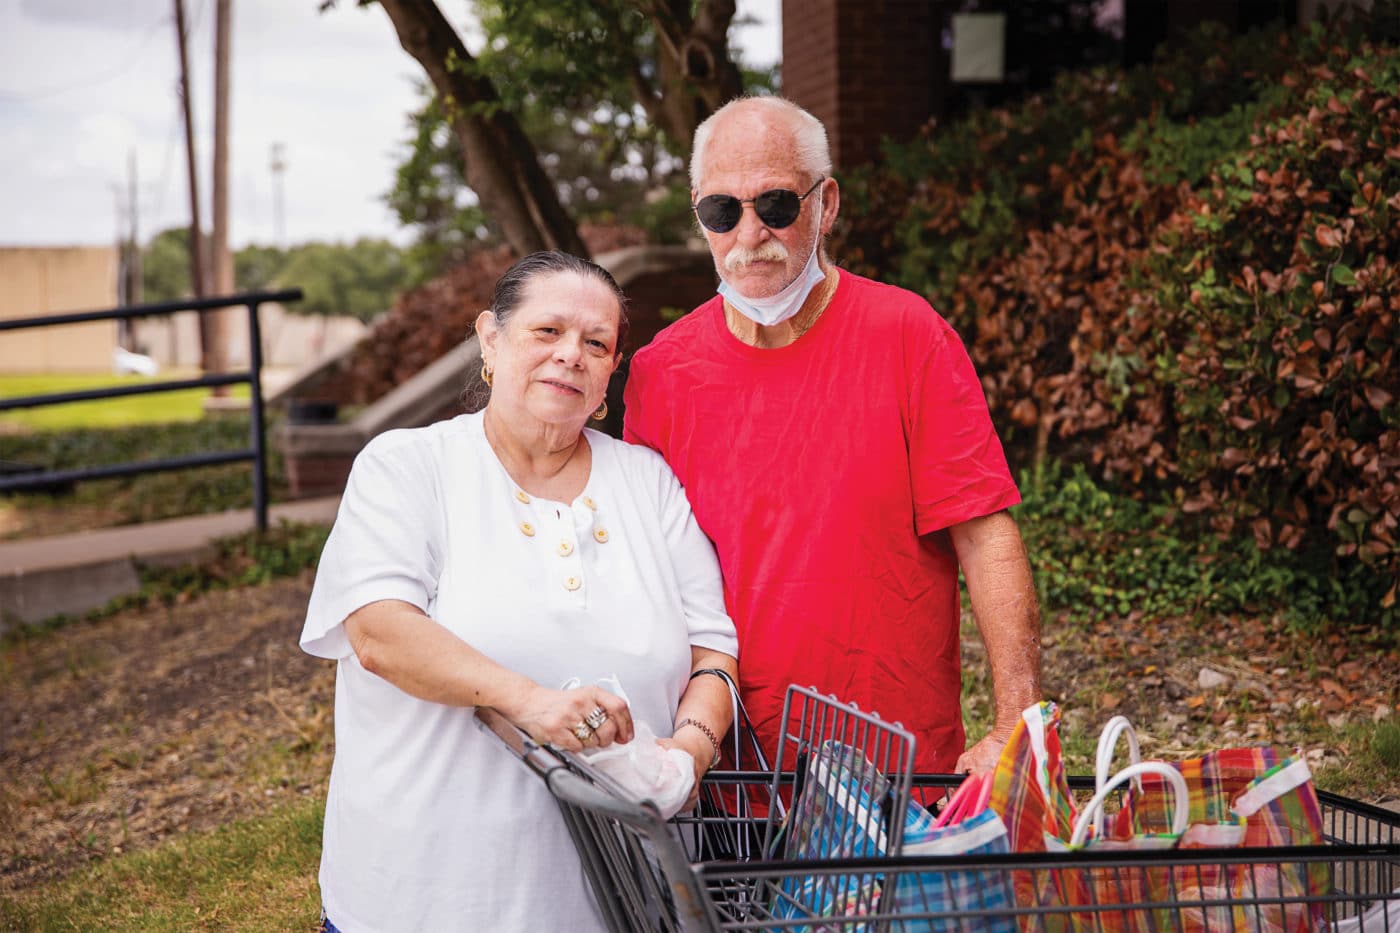 Woman in white shirt next to man in red t-shirt by grocery cart.